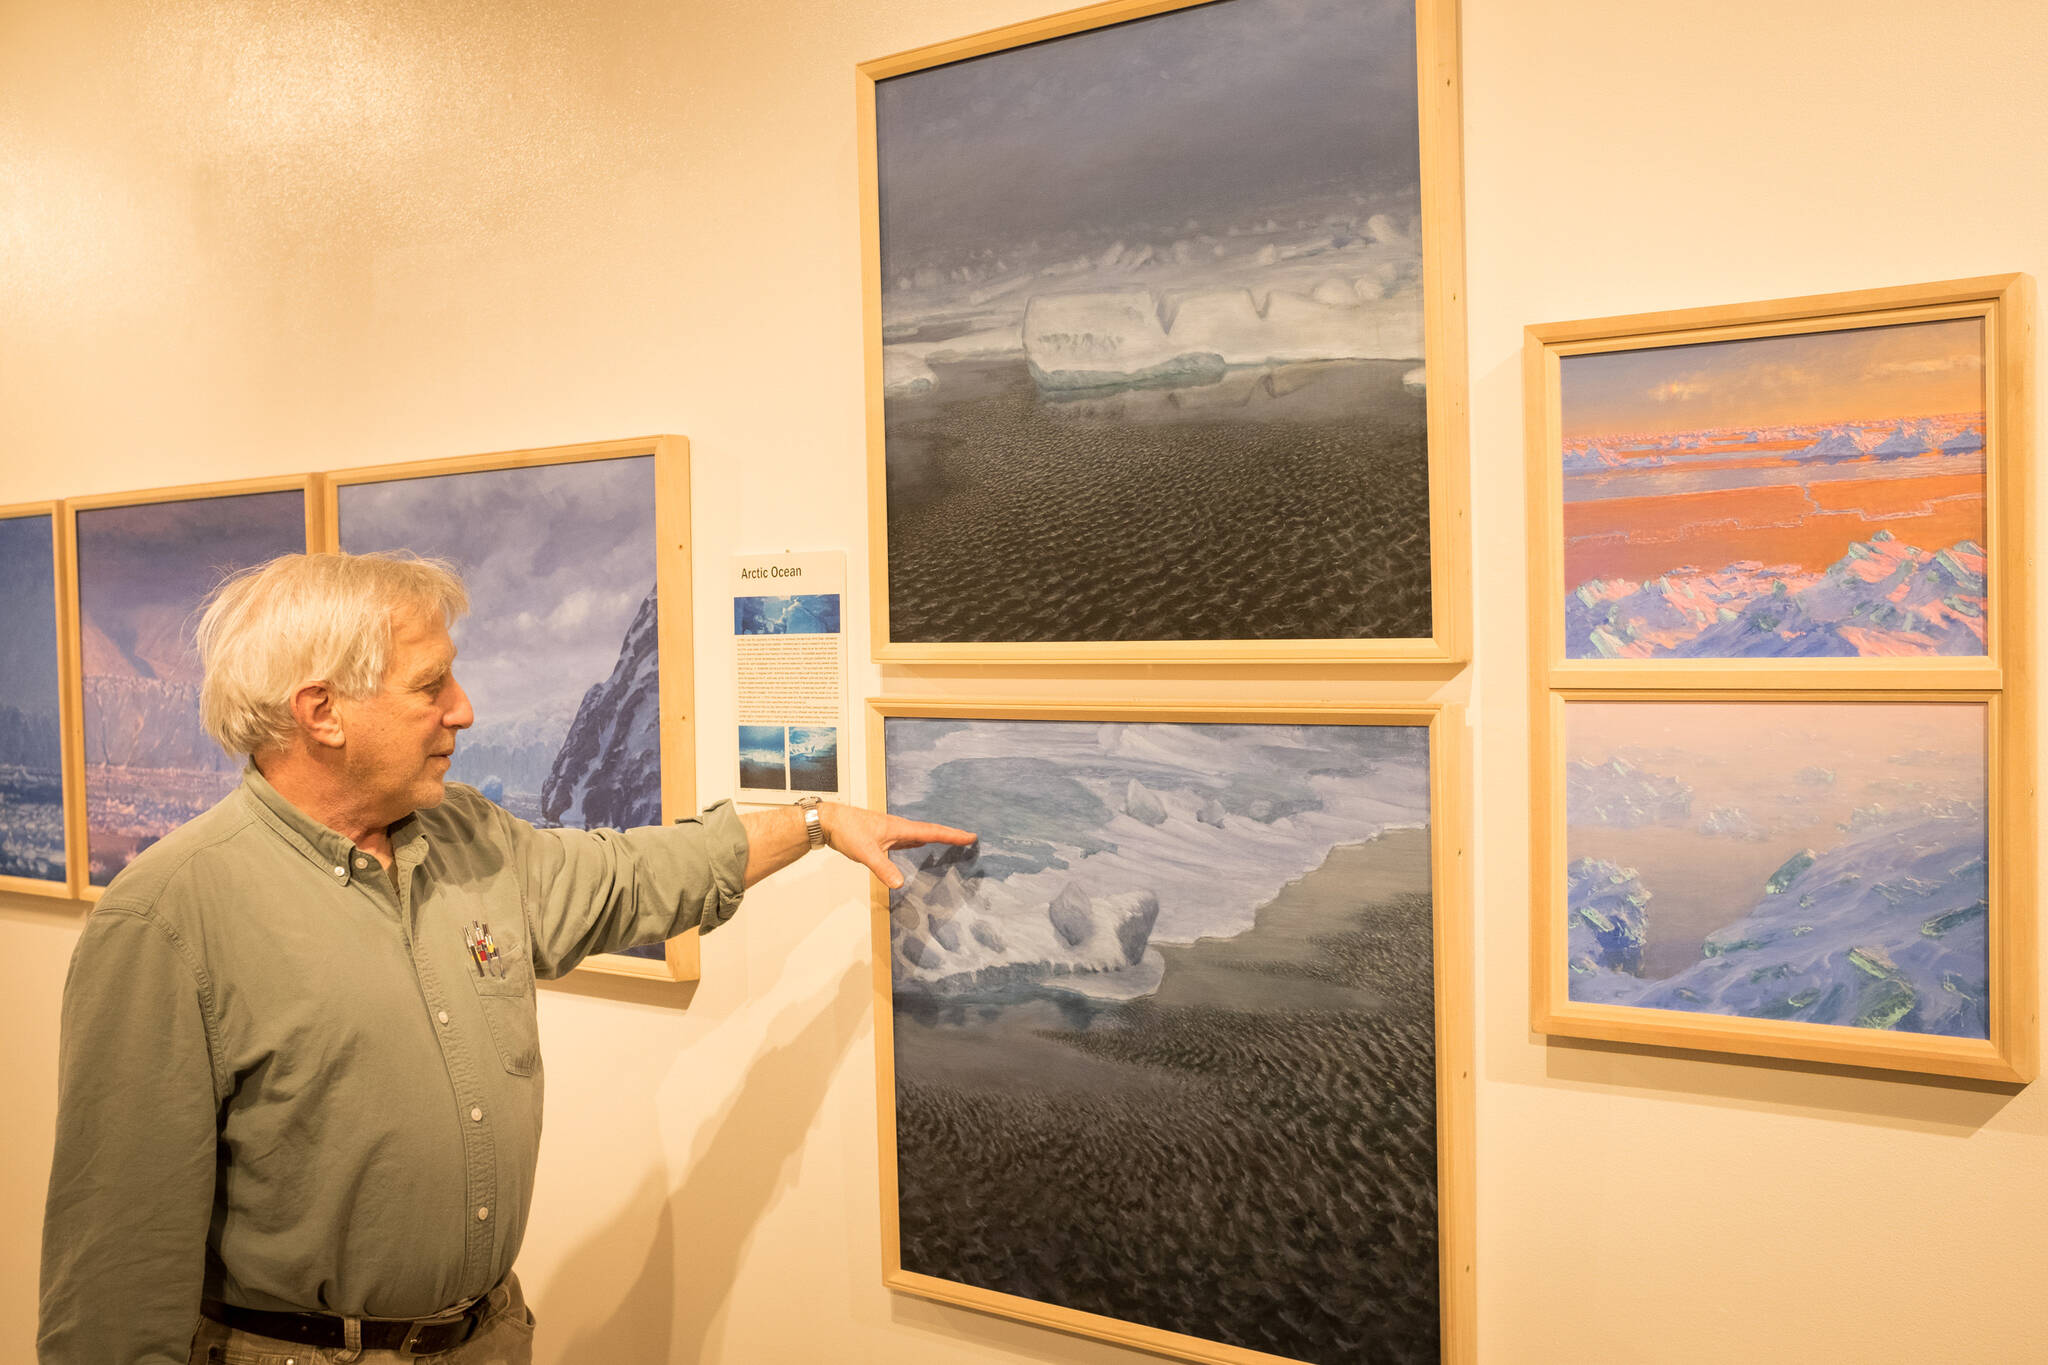 David Rosenthal describes work from his travels around the Arctic Ocean and through the Northwest Passage from his show, “Painting at the Edge of the Ice Age,” at the Pratt Museum & Park in Homer, Alaska. (Photo by Sean McDermott)